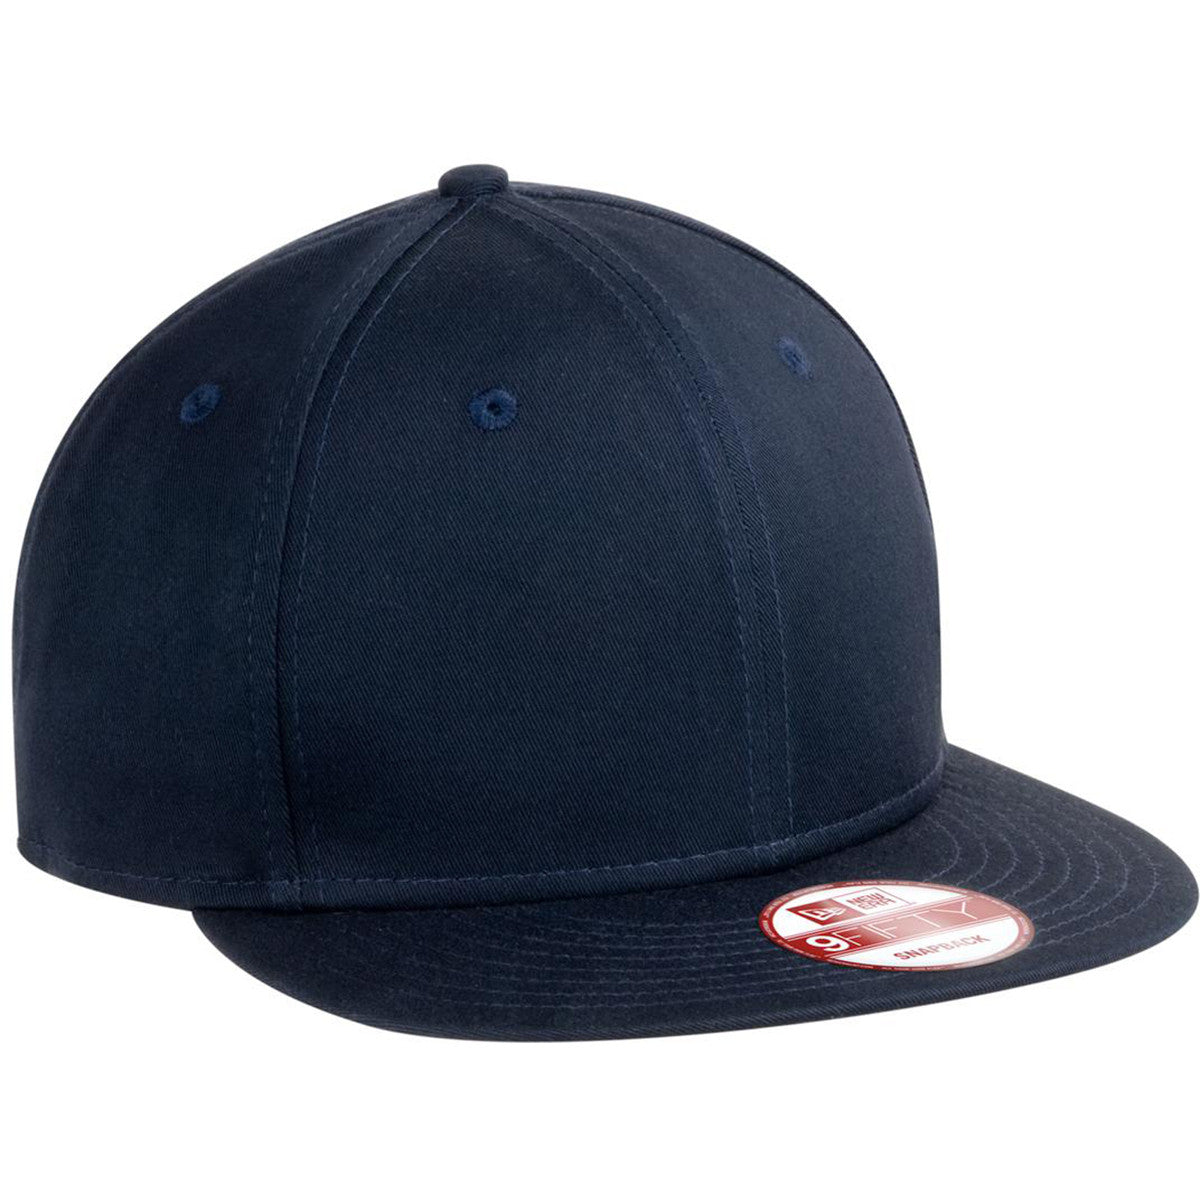 New Era 9FIFTY Hat Review- Hats By The Hundred 